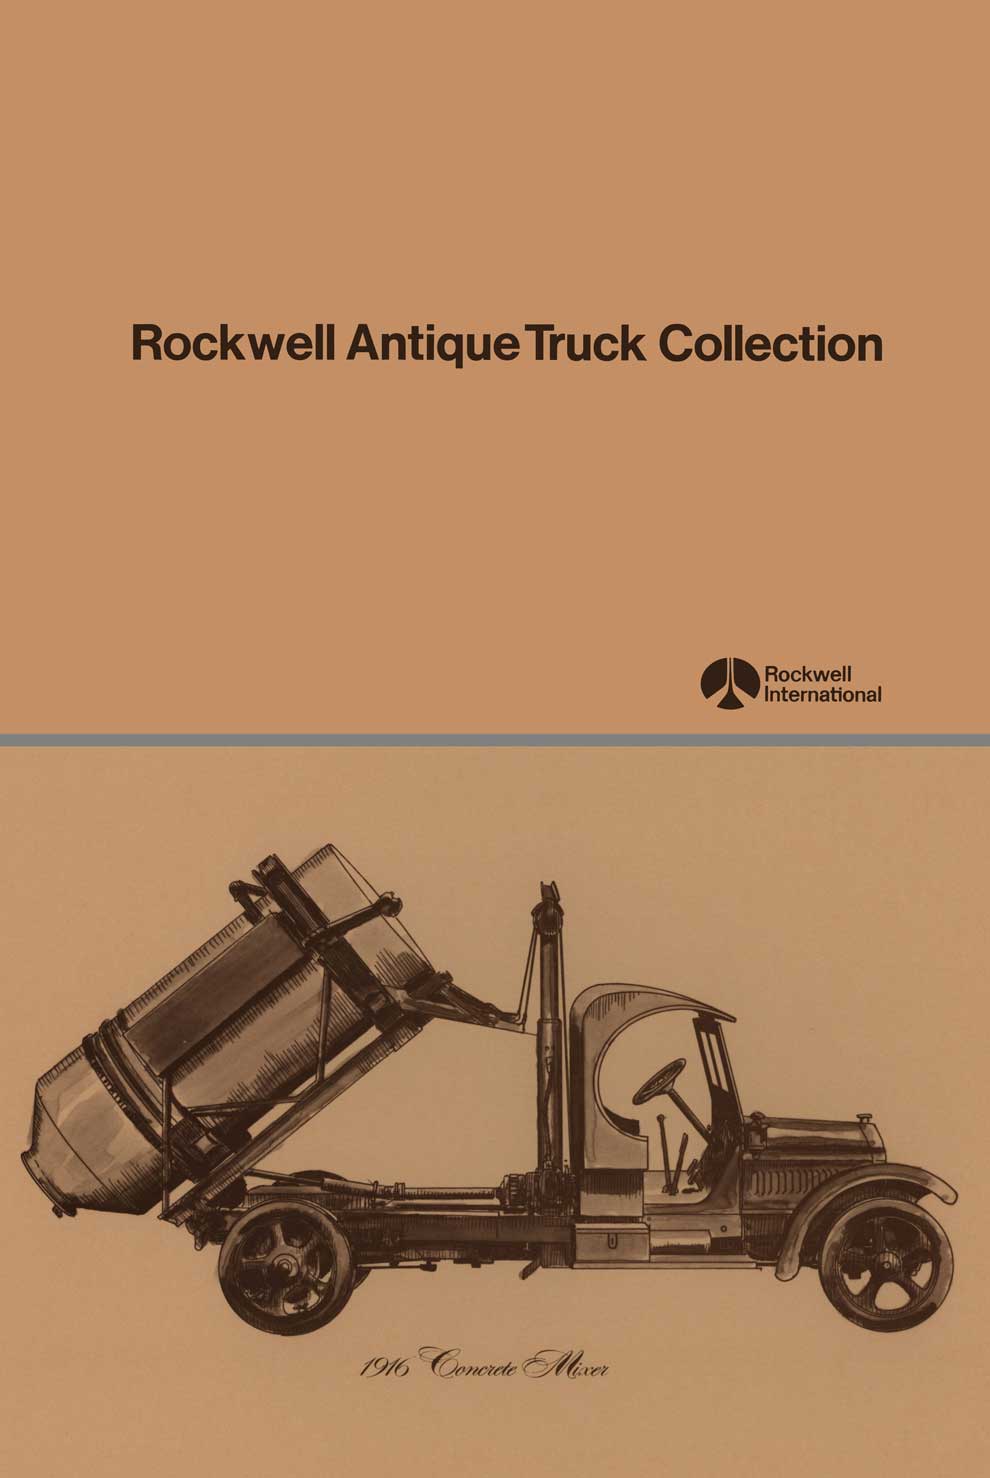 Rockwell Antique Truck Collection Circa 1915 - 1924